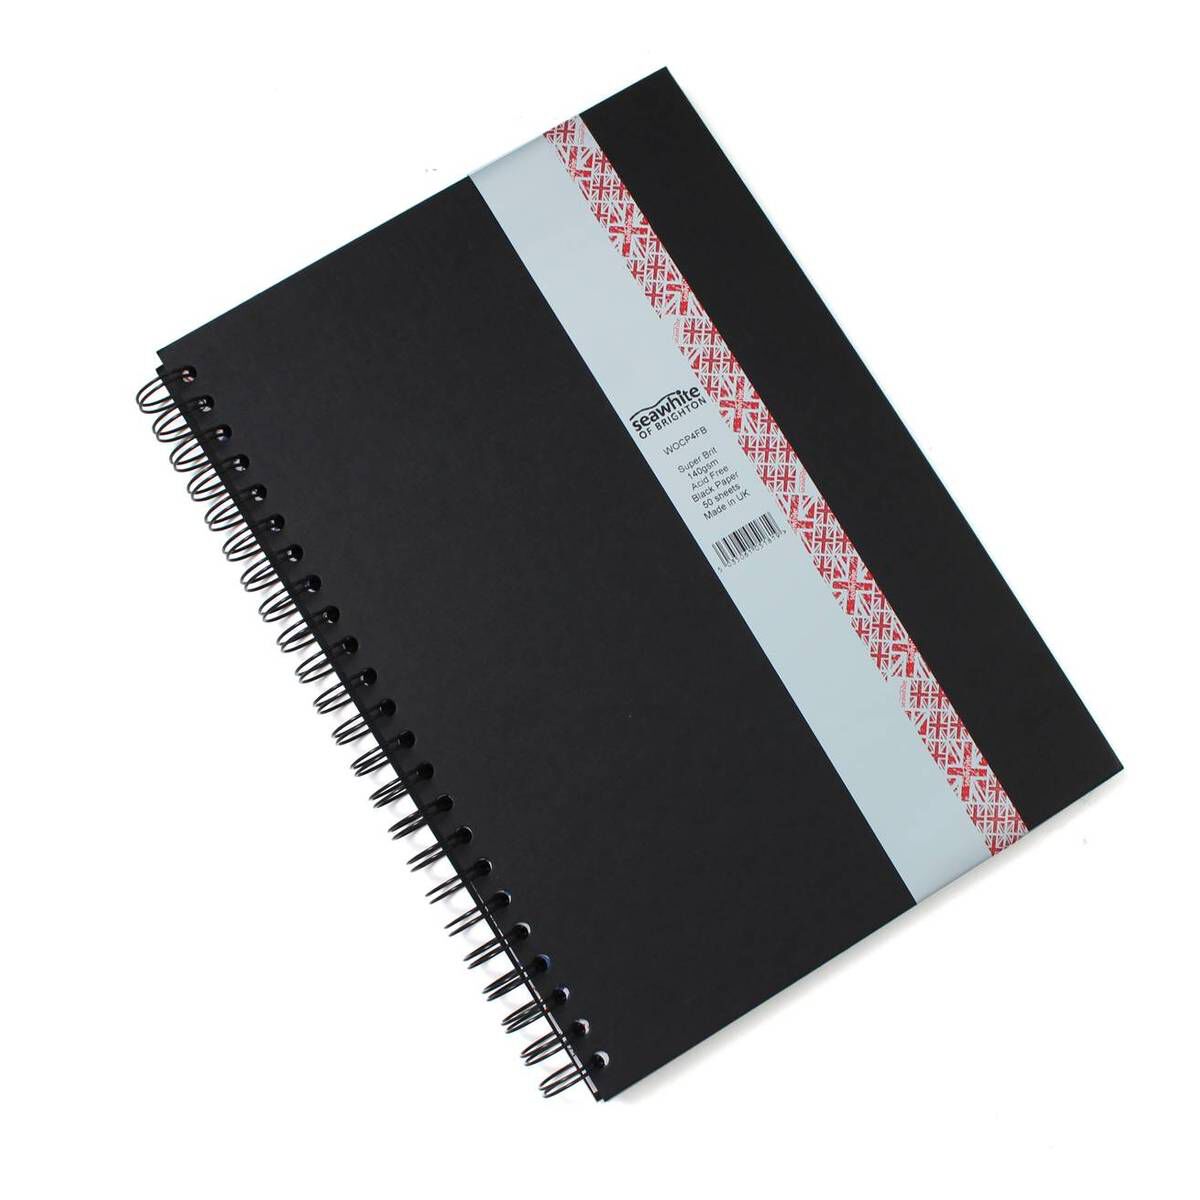 Buy the Black Wirebound Sketchbook by Artists Loft at Michaels